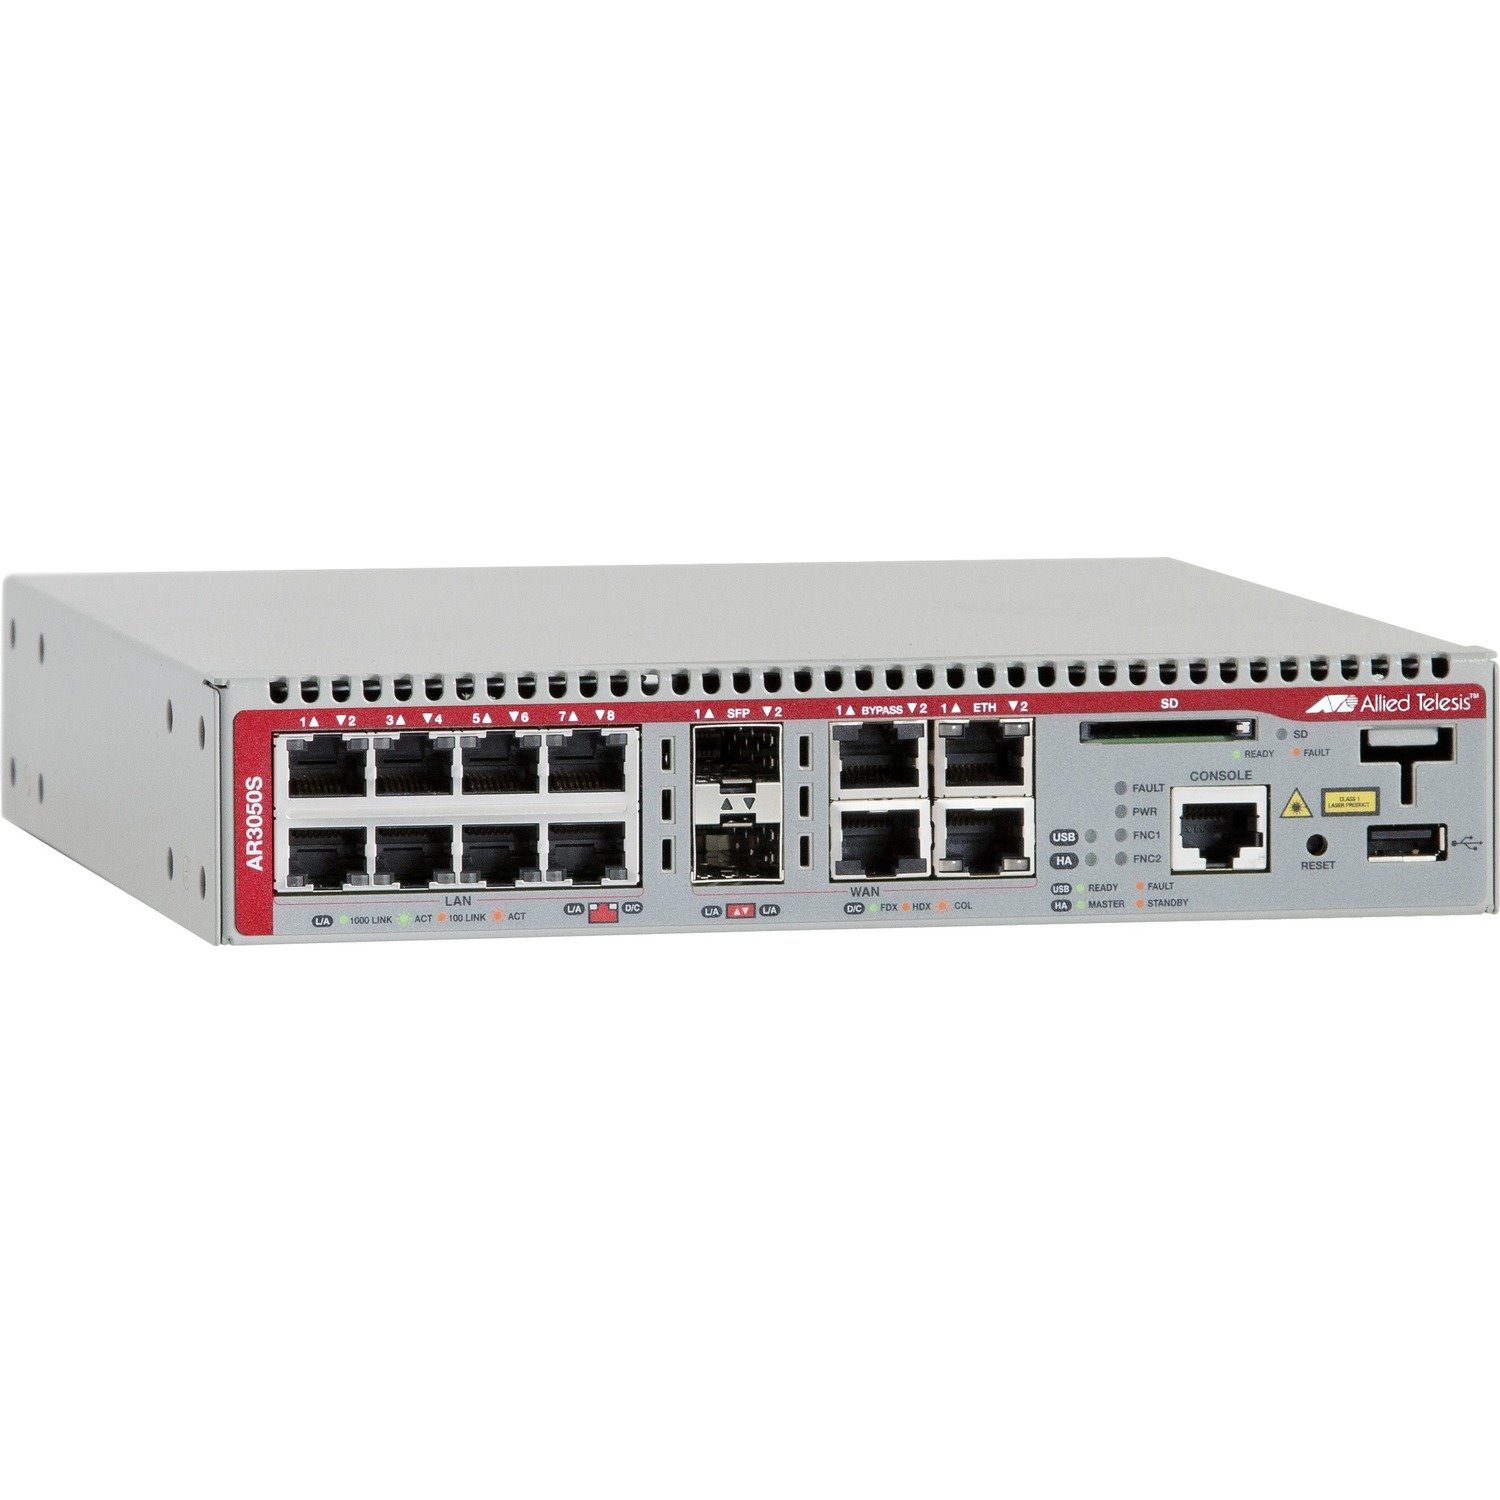 Allied Telesis AT-AR3050S Network Security/Firewall Appliance